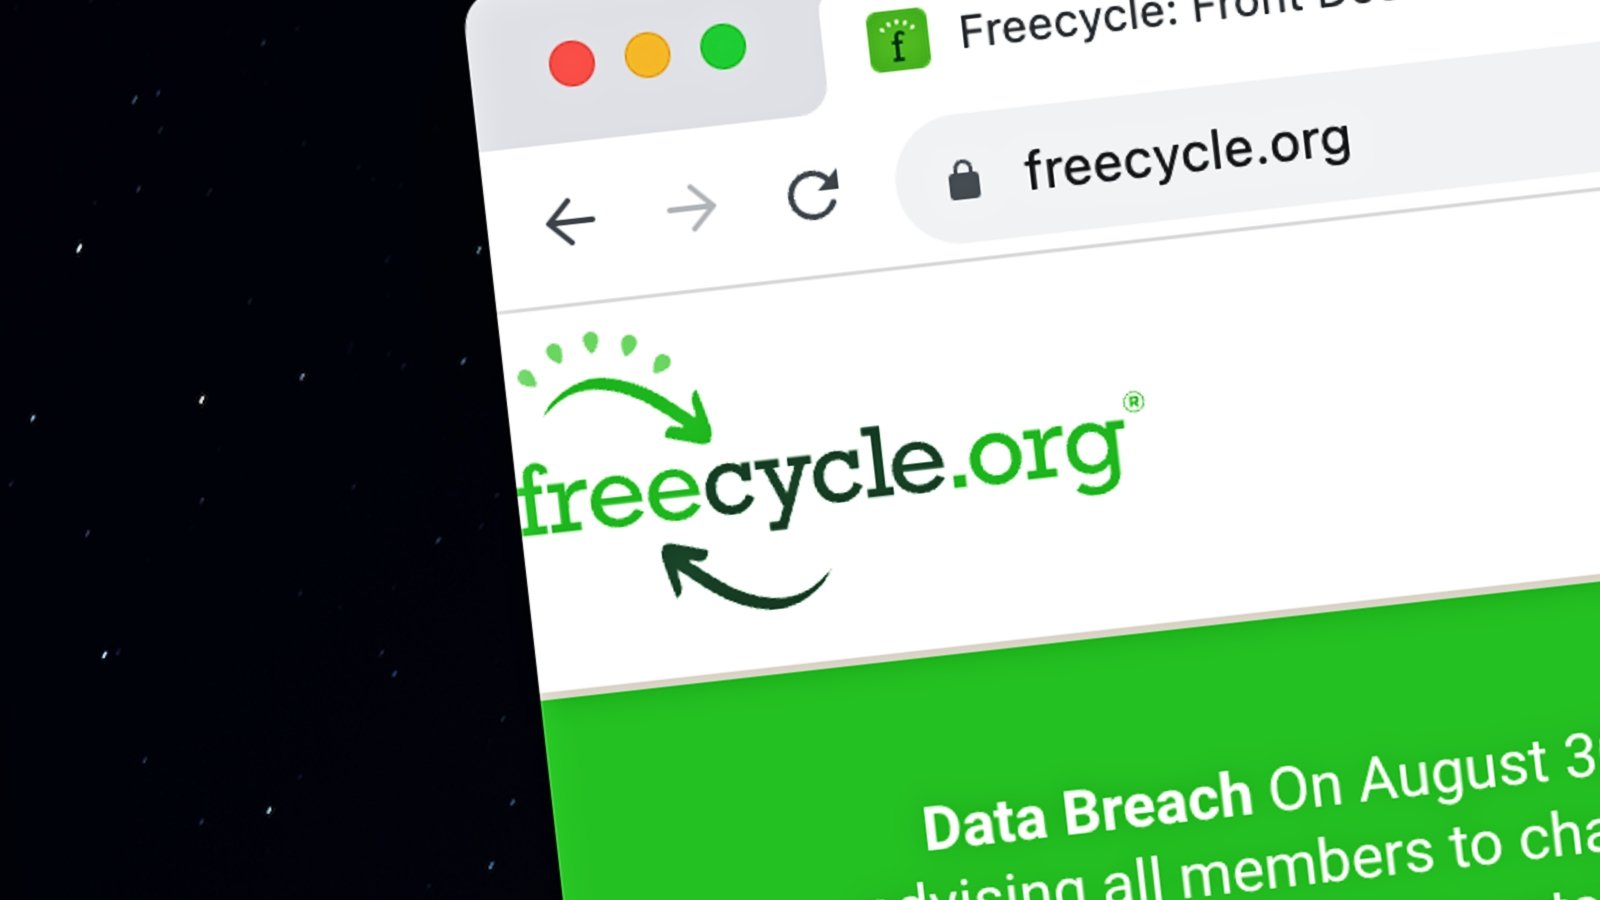 Freecycle data breach impacted 7 Million users